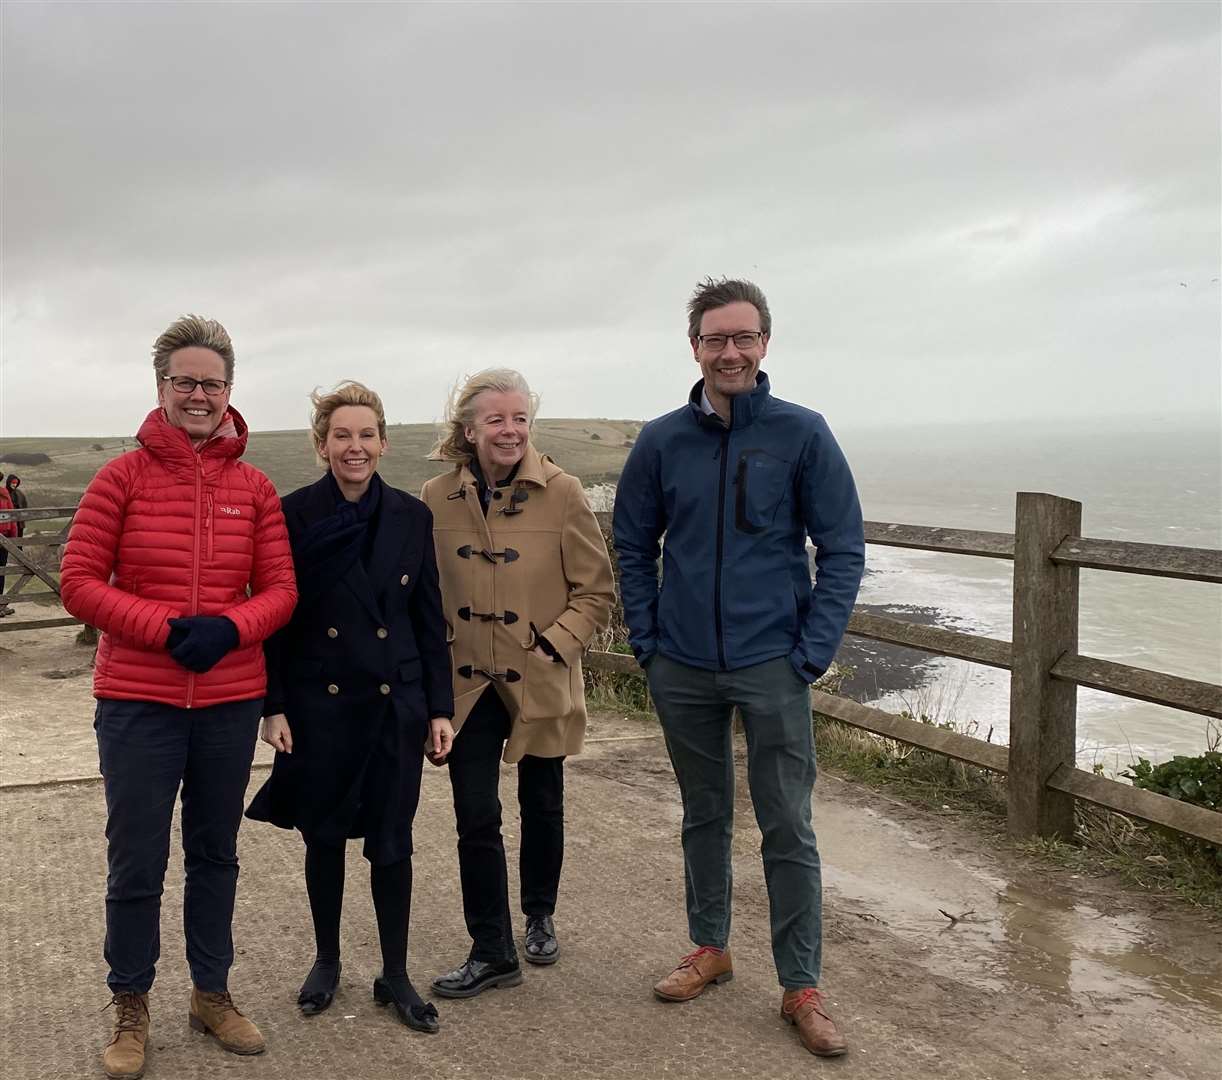 Natalie Elphicke on a visit to the White Cliffs. Picture: the office of Natalie Elphicke MP